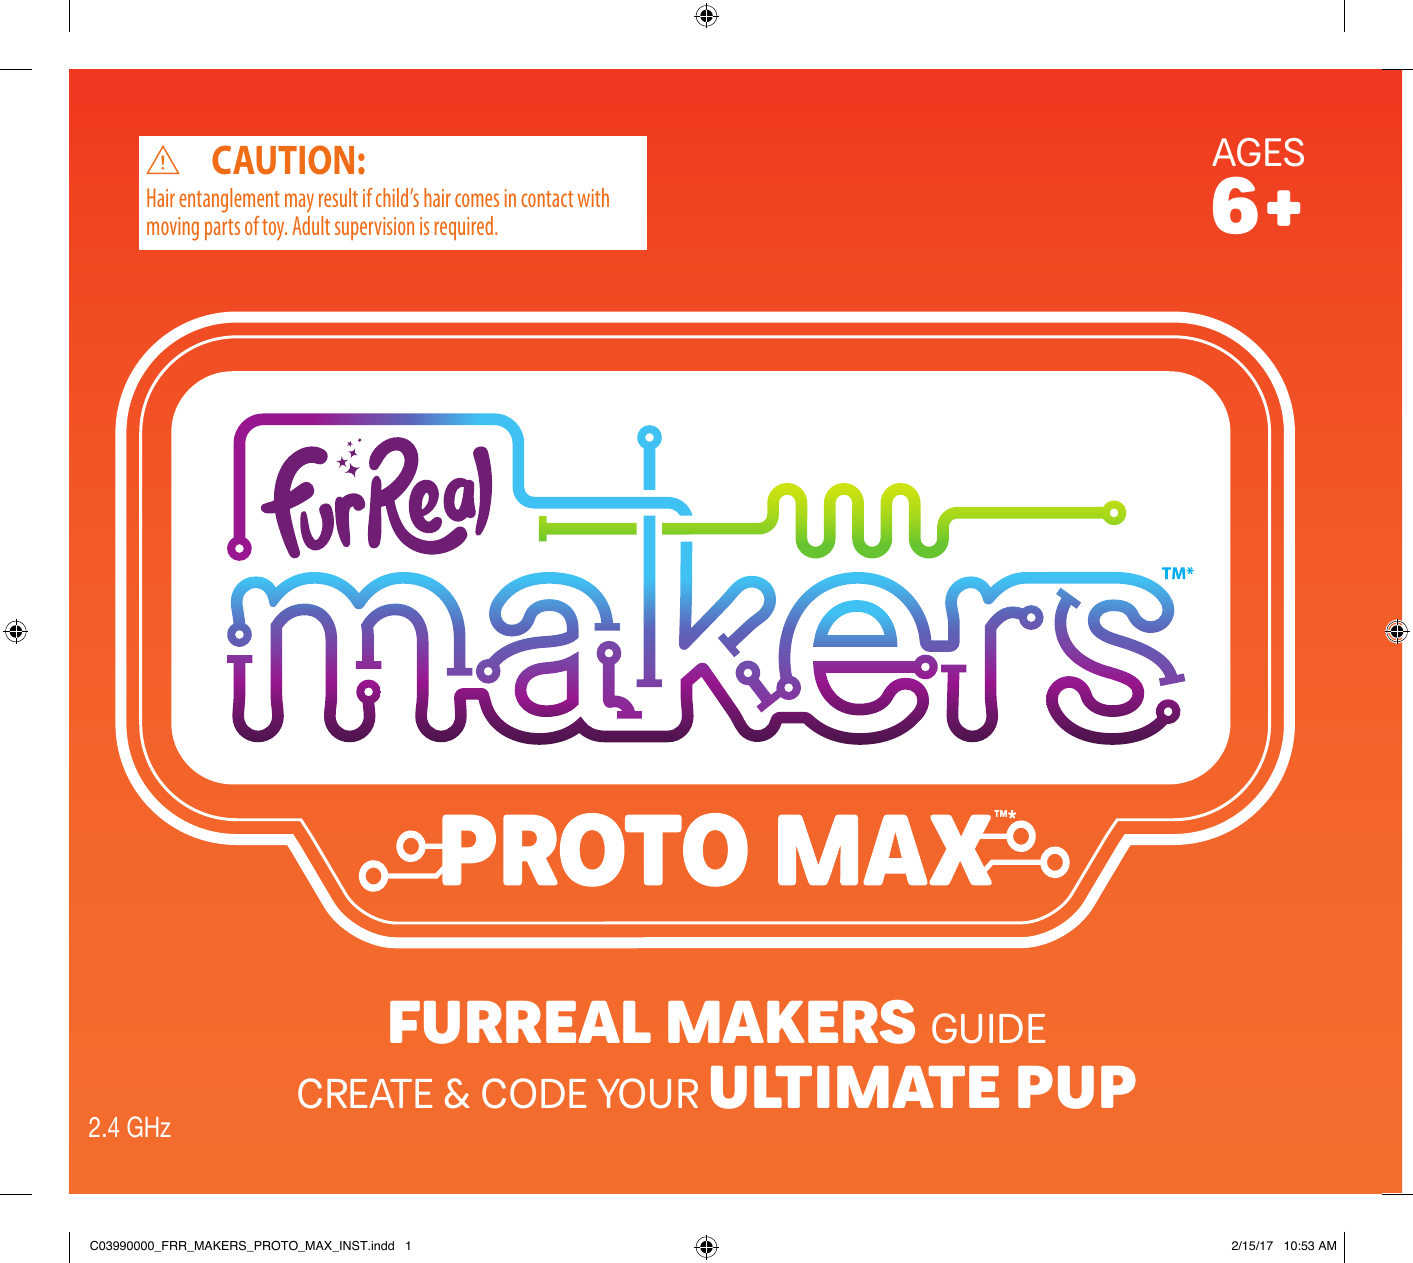 AGES6+Hair entanglement may result if child’s hair comes in contact with moving parts of toy. Adult supervision is required.CAUTION:FURREAL MAKERS GUIDECREATE &amp; CODE YOUR ULTIMATE PUP2.4 GHzC03990000_FRR_MAKERS_PROTO_MAX_INST.indd   1 2/15/17   10:53 AM